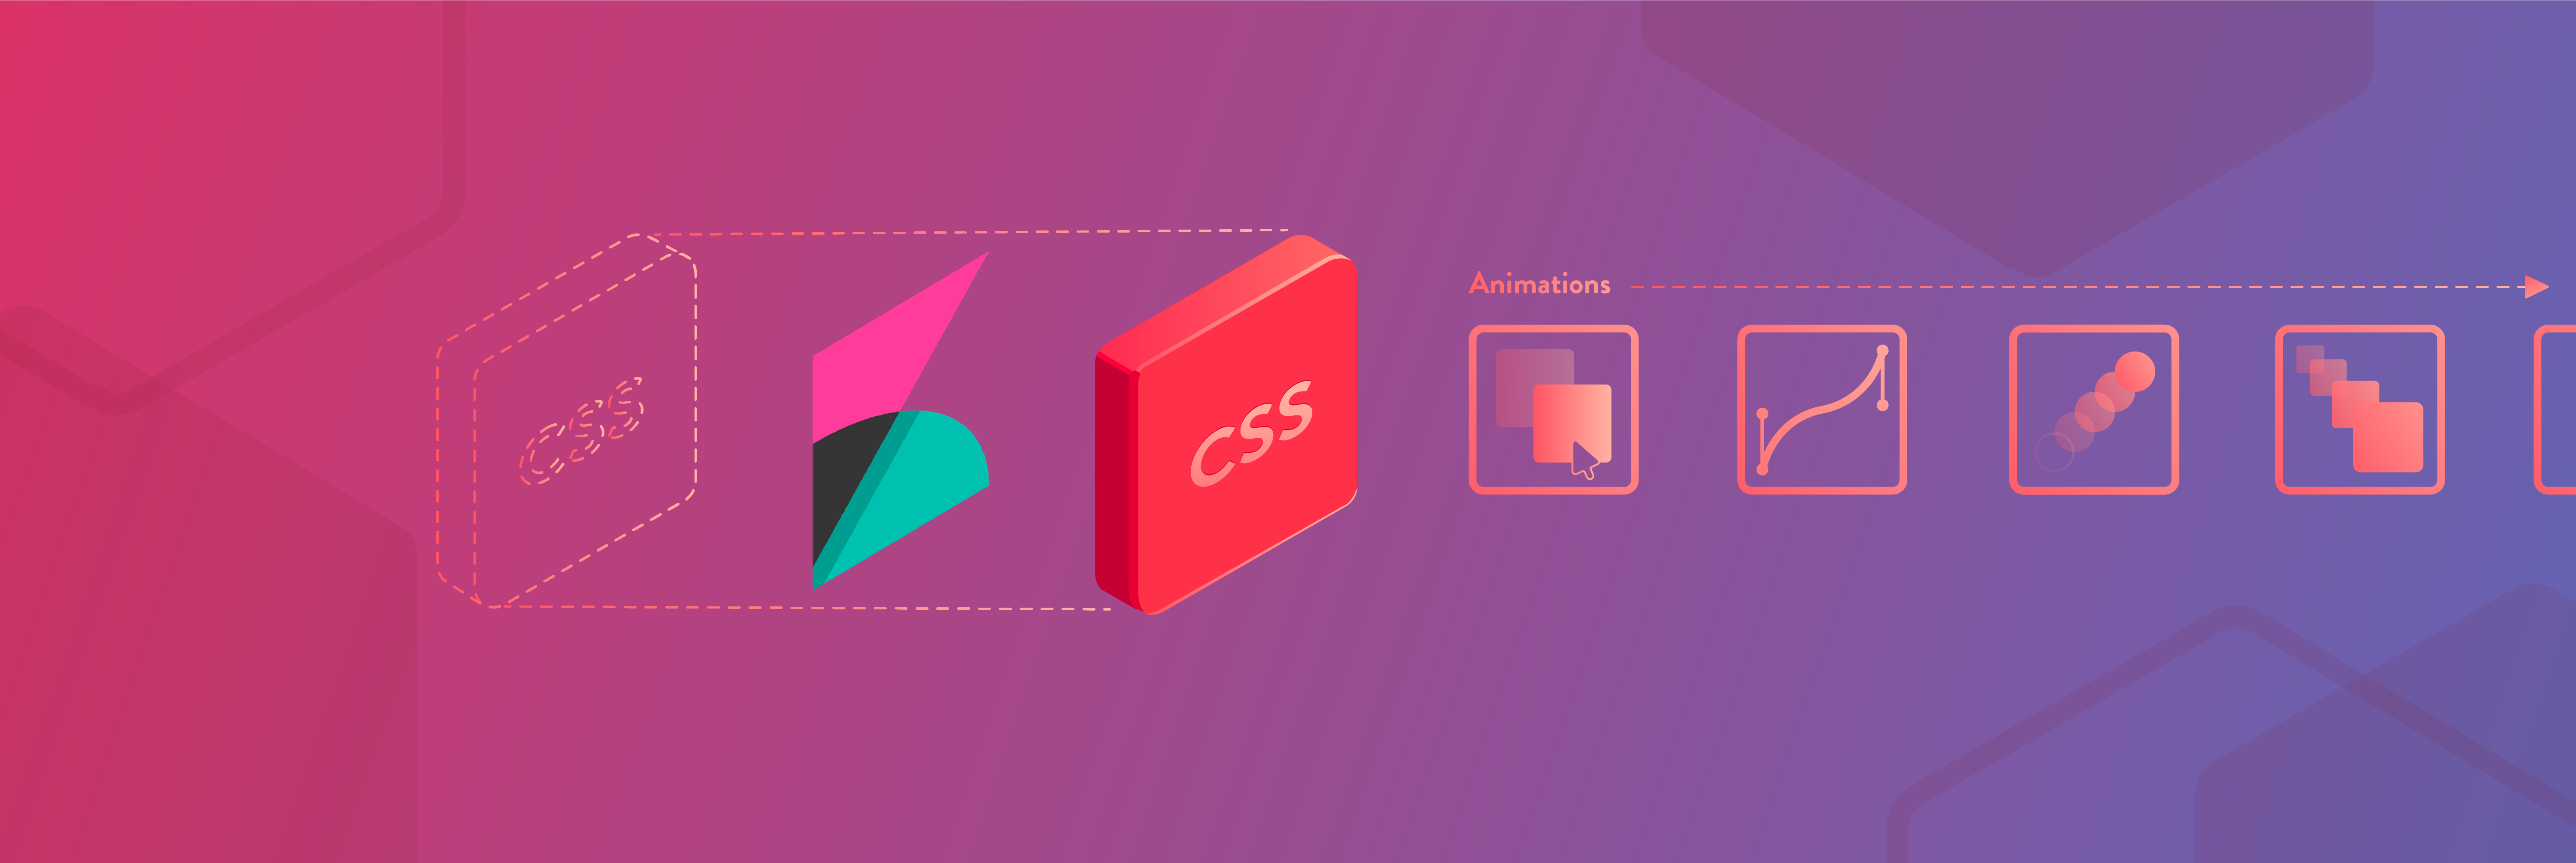 Advanced CSS in Canvas. Dreaming of all the possibilities now! | by Caleb  Keller | Smart Platform Group